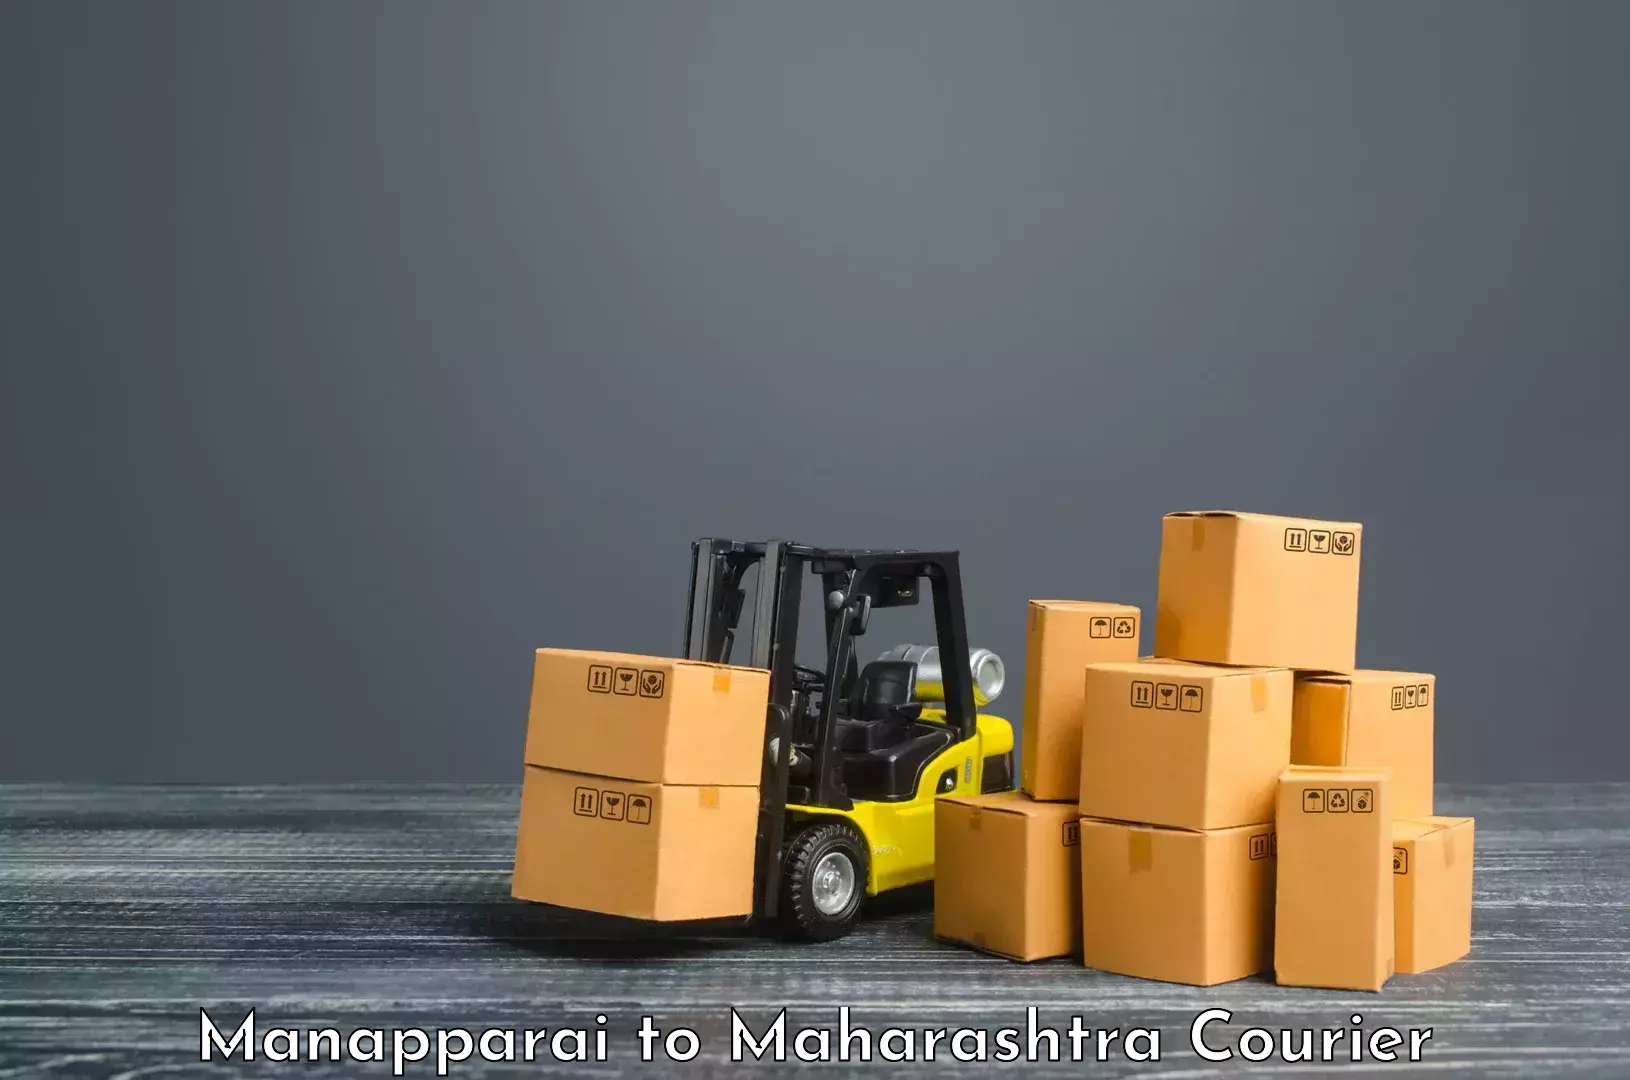 Nationwide parcel services Manapparai to Georai